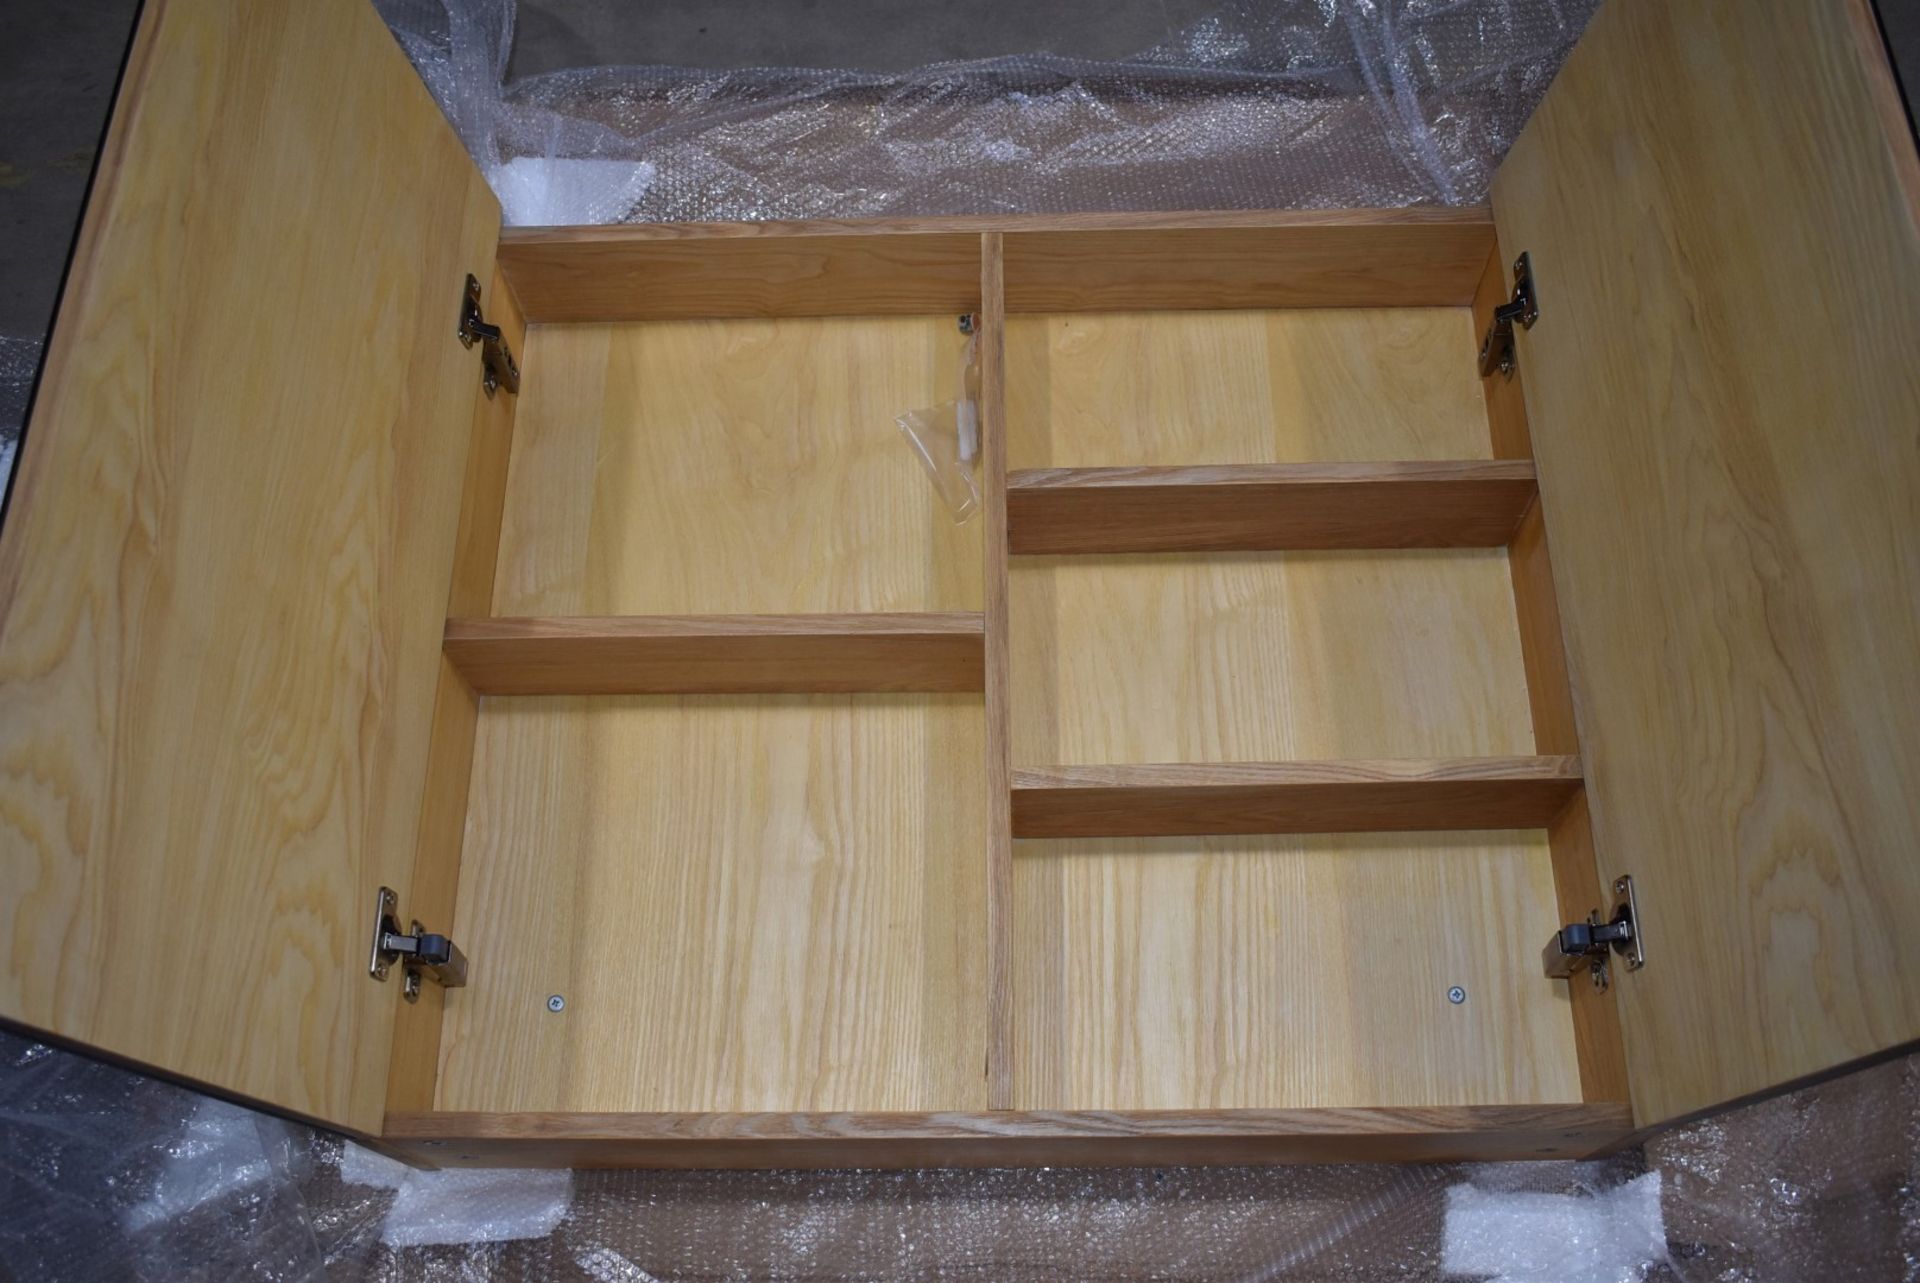 1 x Two Door Mirrored Bathroom Wall Cabinet With an Oak Finish and Internal Shelf Compartments - New - Image 2 of 3